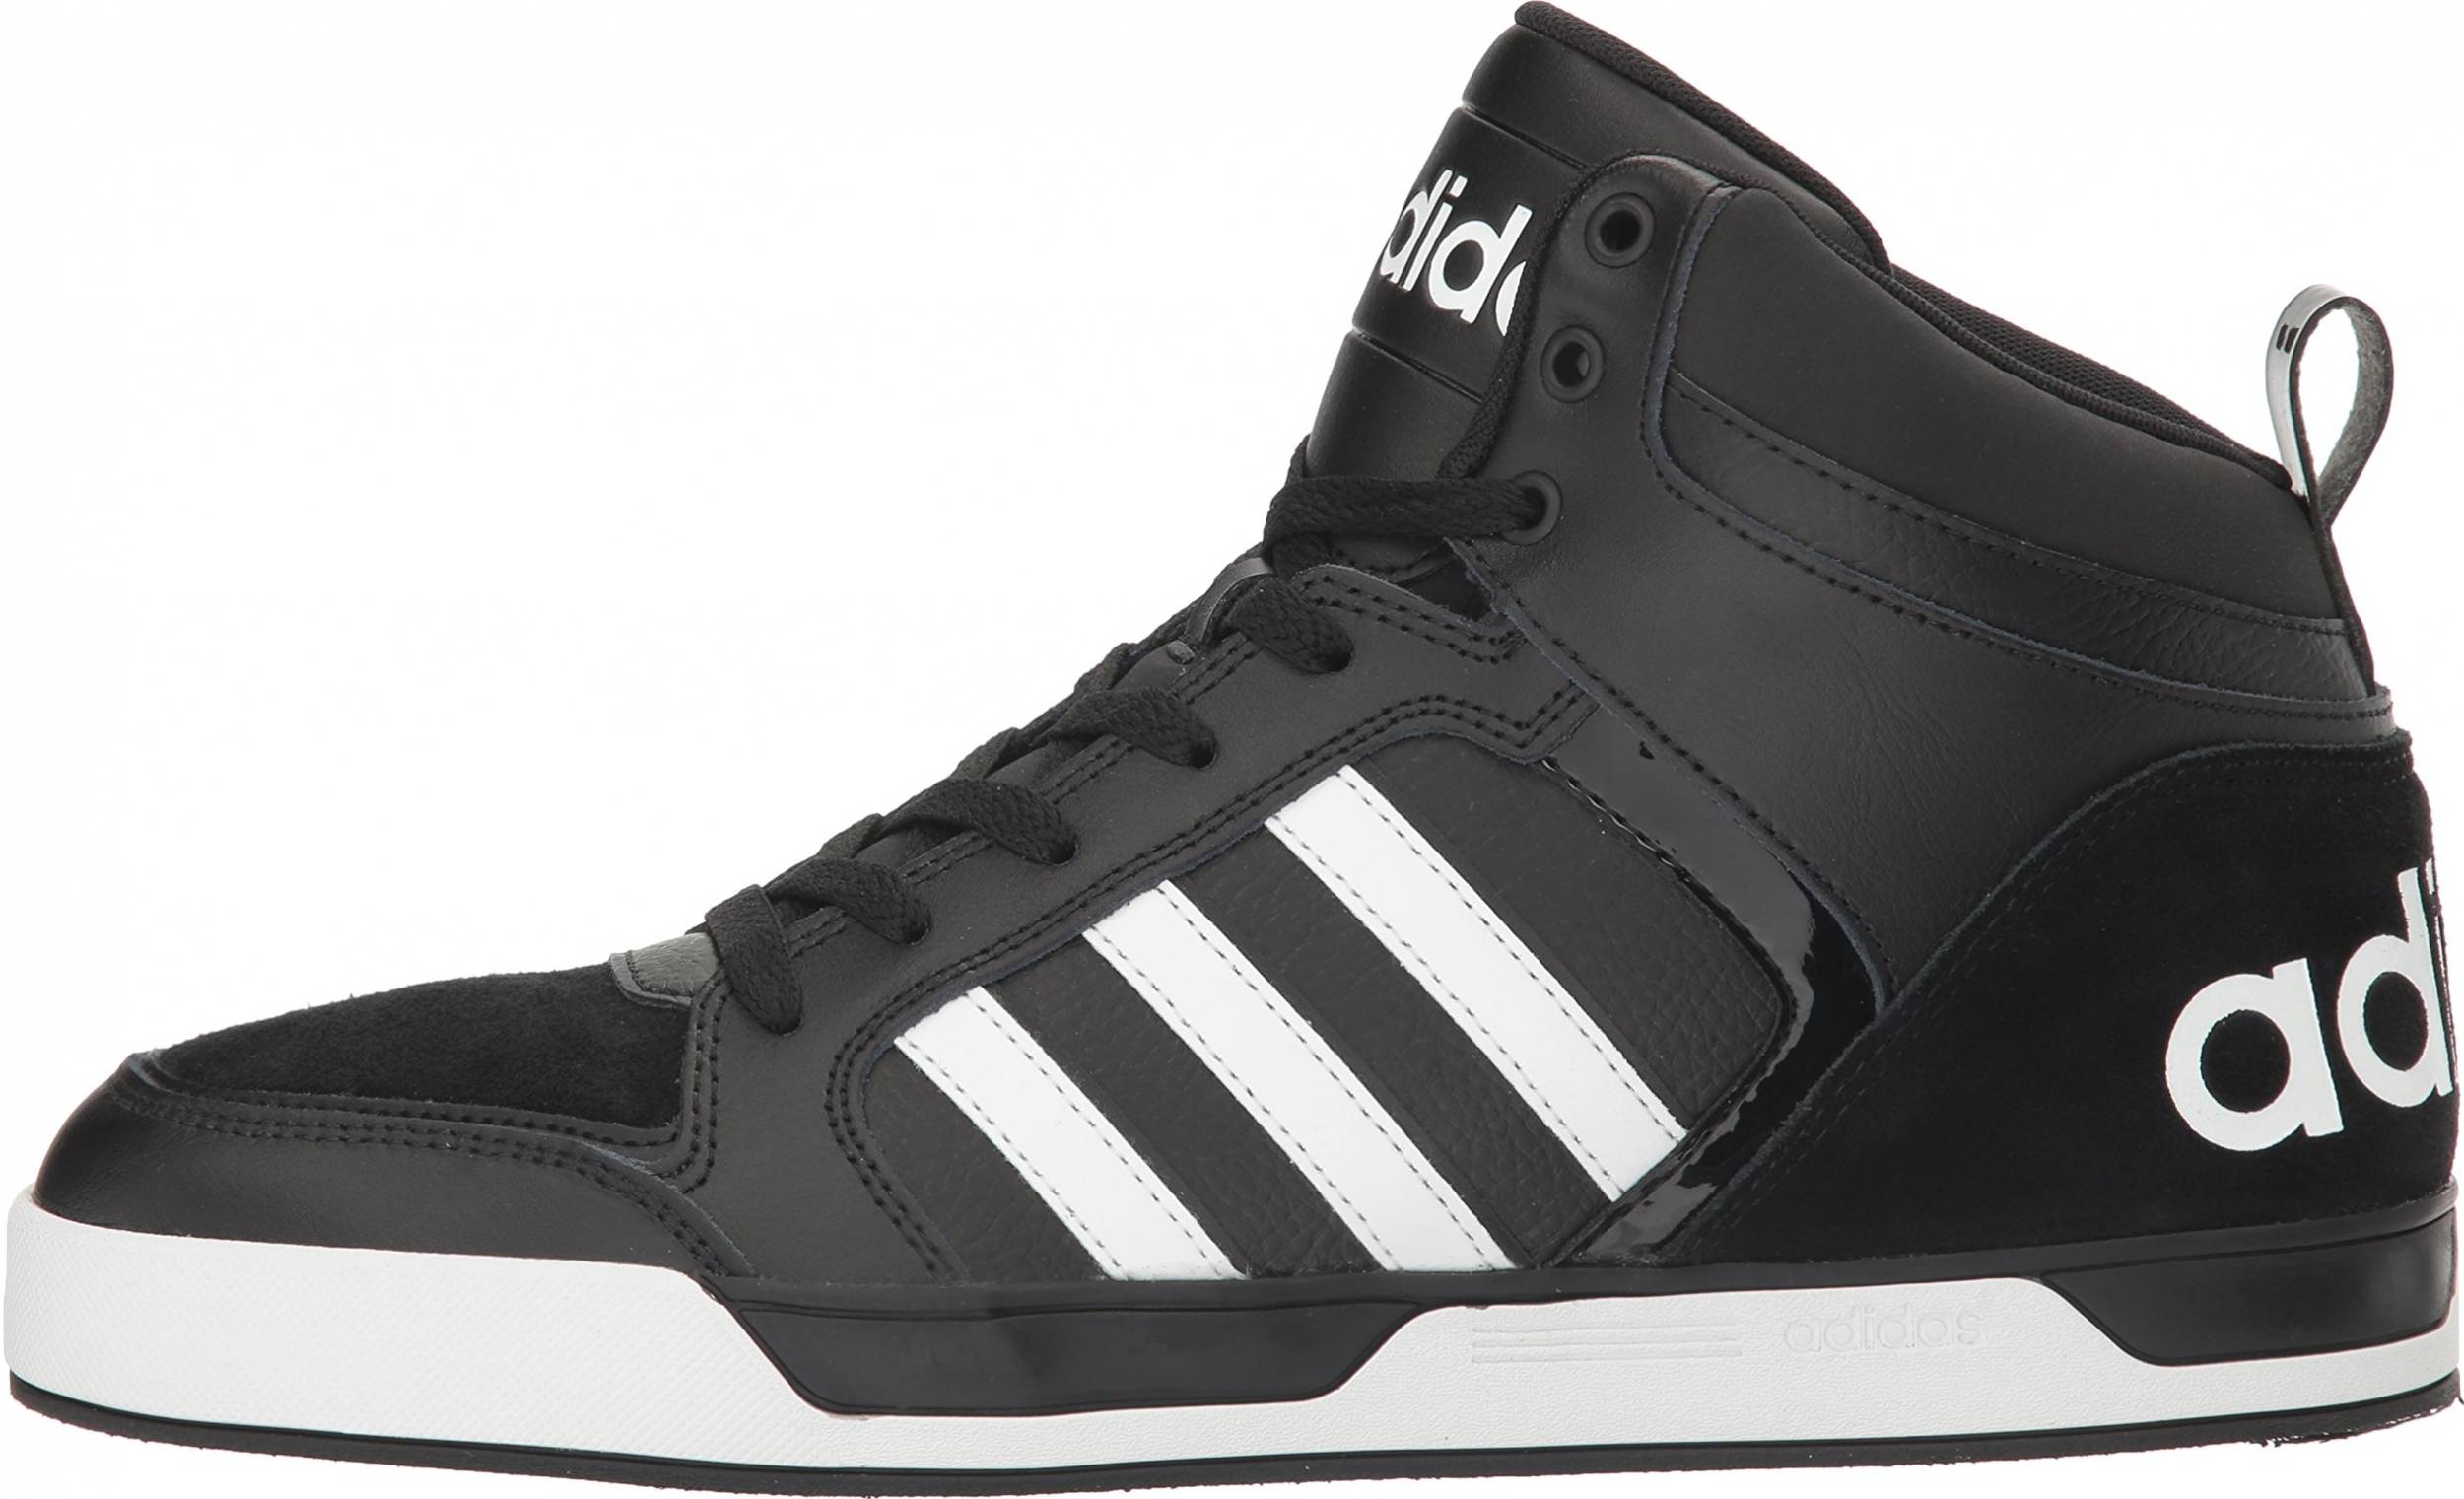 adidas neo raleigh mid top